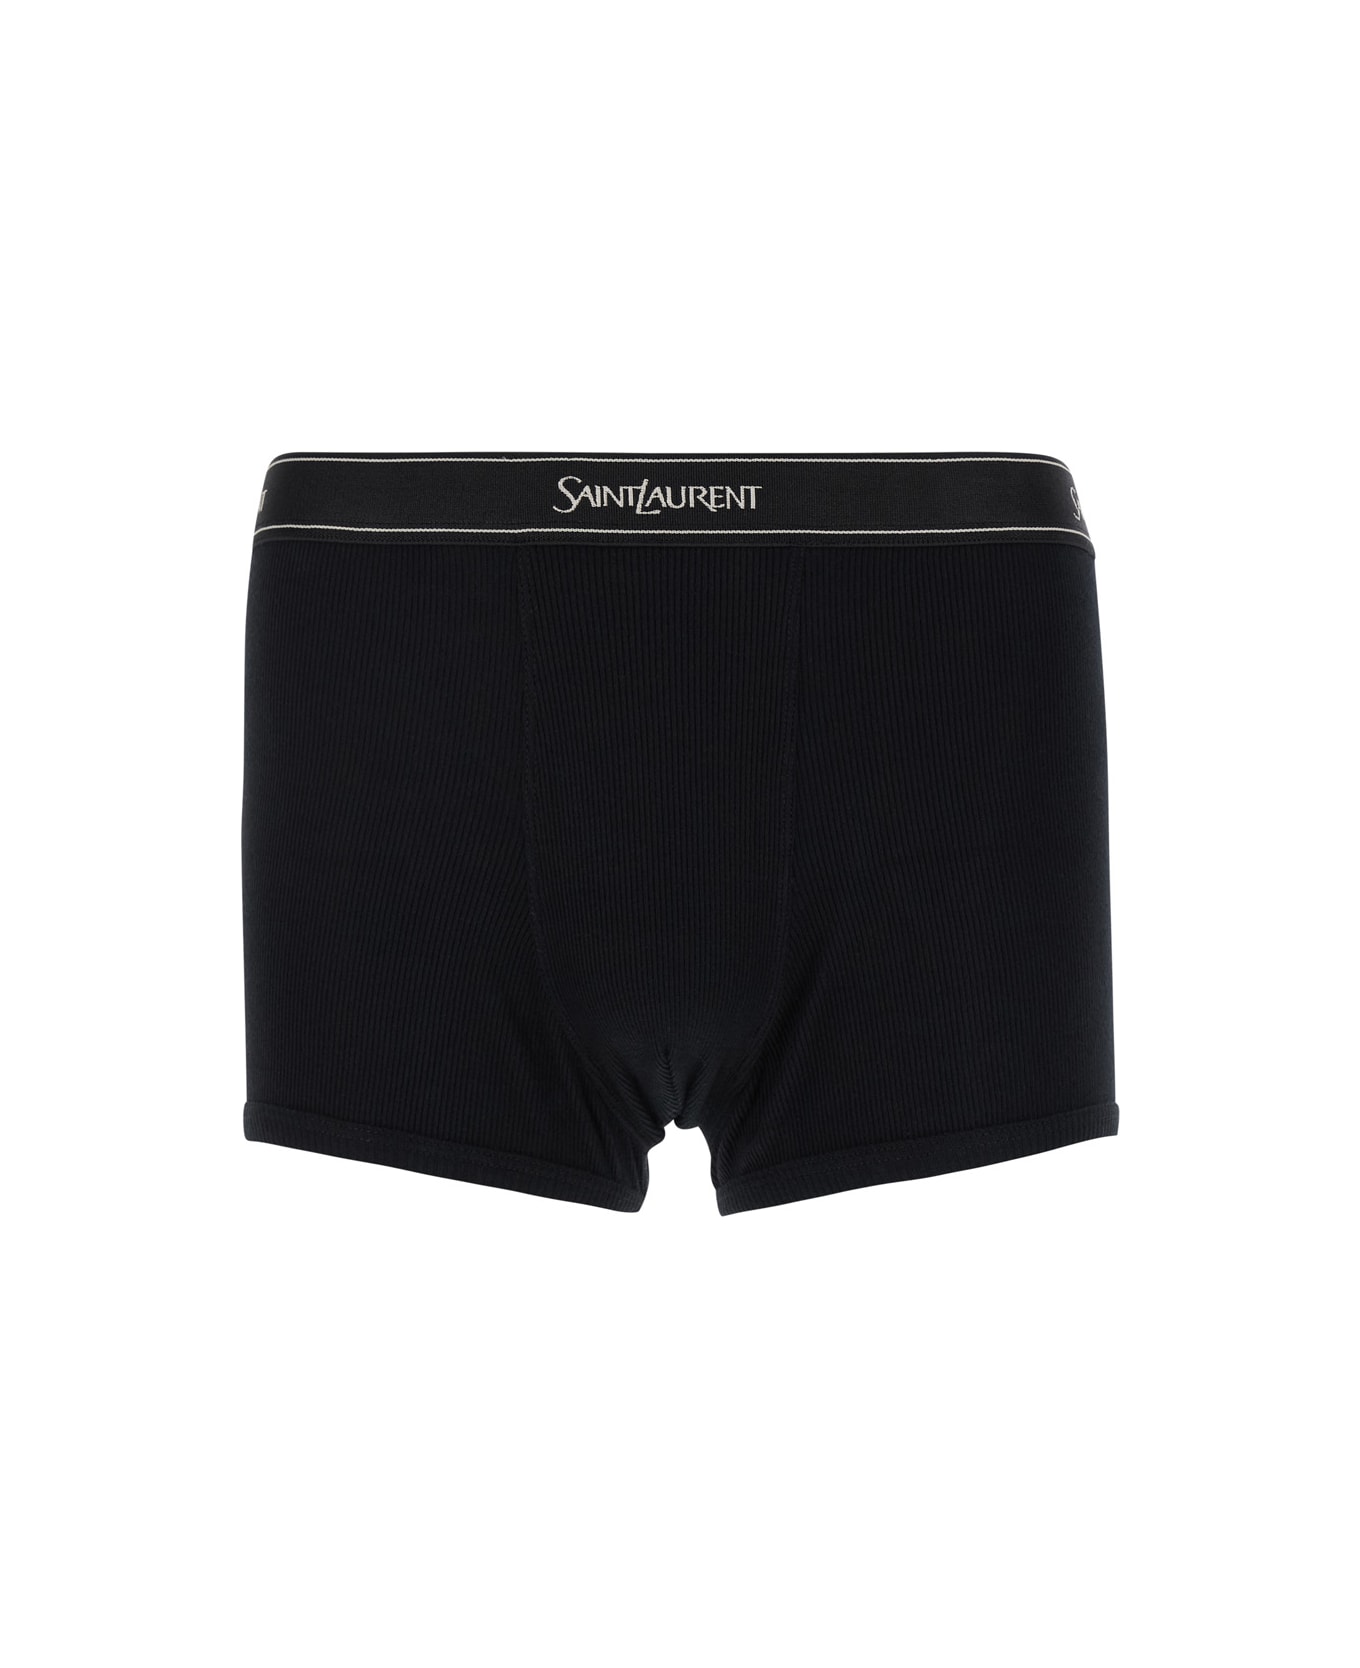 Saint Laurent Black Boxer Briefs With Logo Lettering Embroidery In Ribbed Cotton Man - NERO